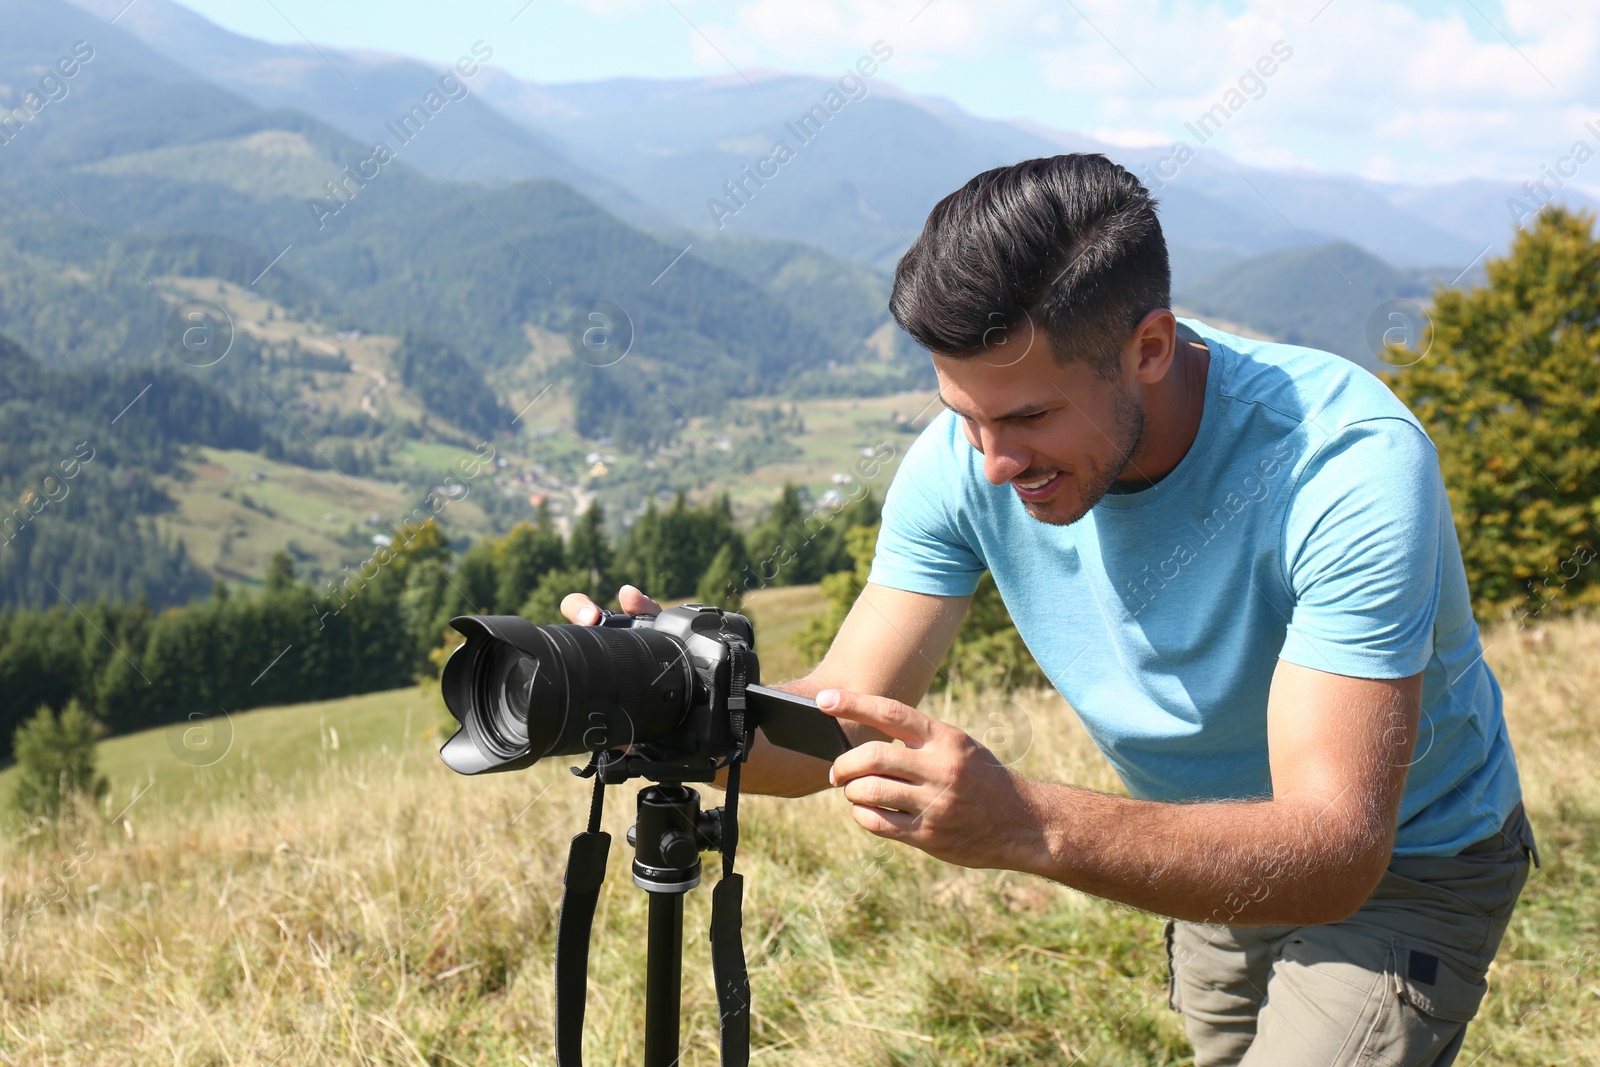 Photo of Man taking photo of mountain landscape with modern camera on tripod outdoors